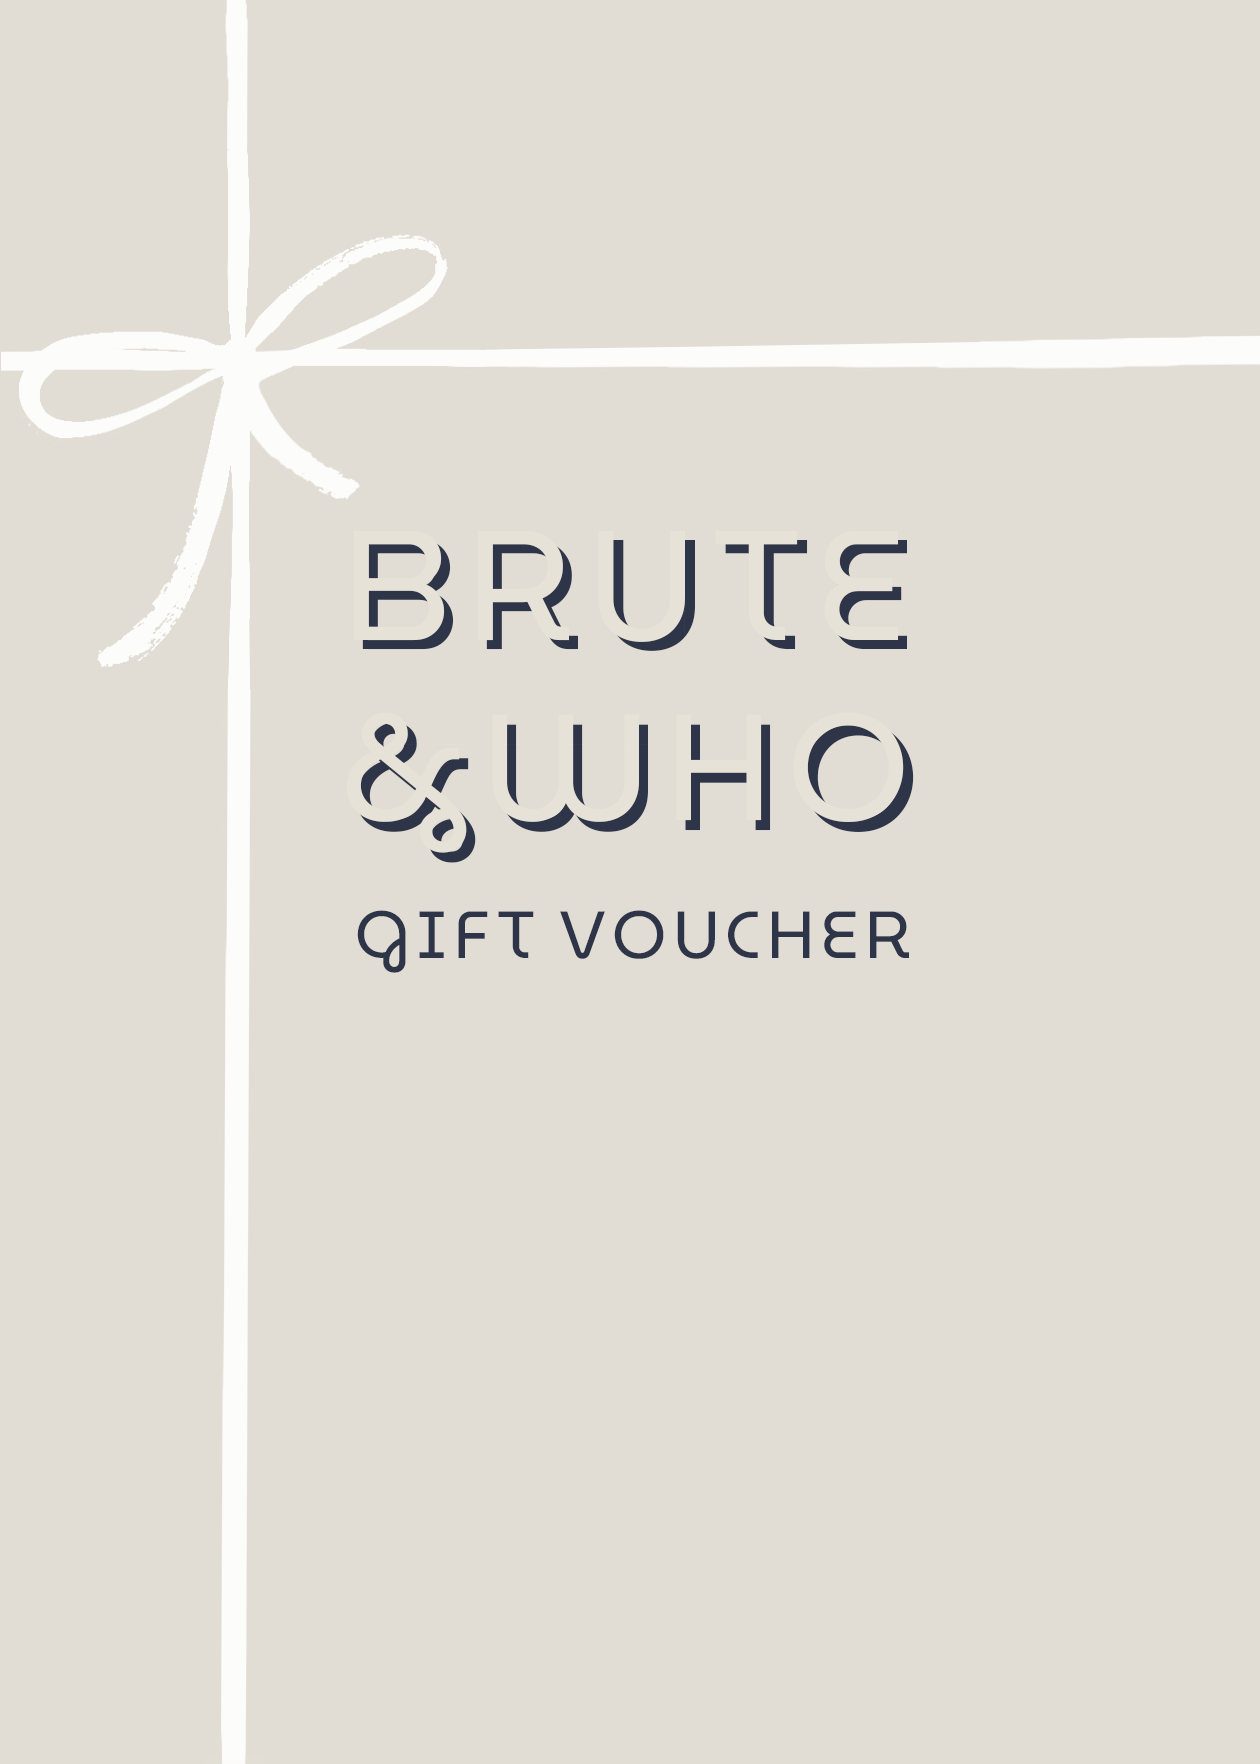 Brute&Who Gift Voucher